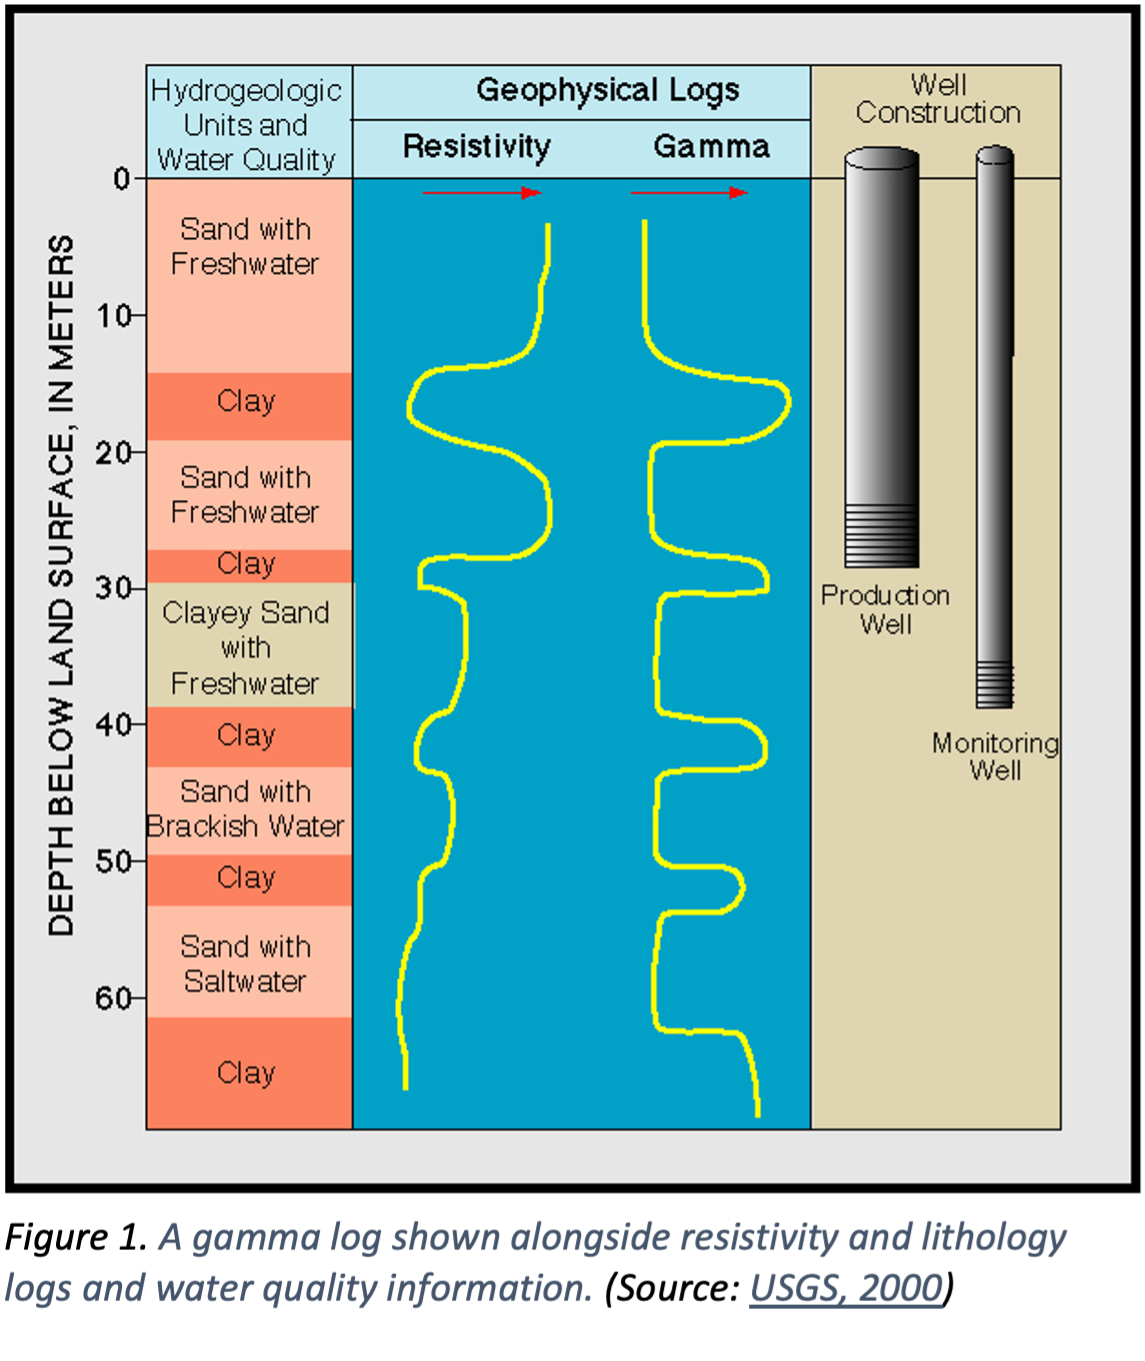 Figure 1. A gamma log shown alongside resistivity and lithology logs and water quality information (Source: USGS, 2000).